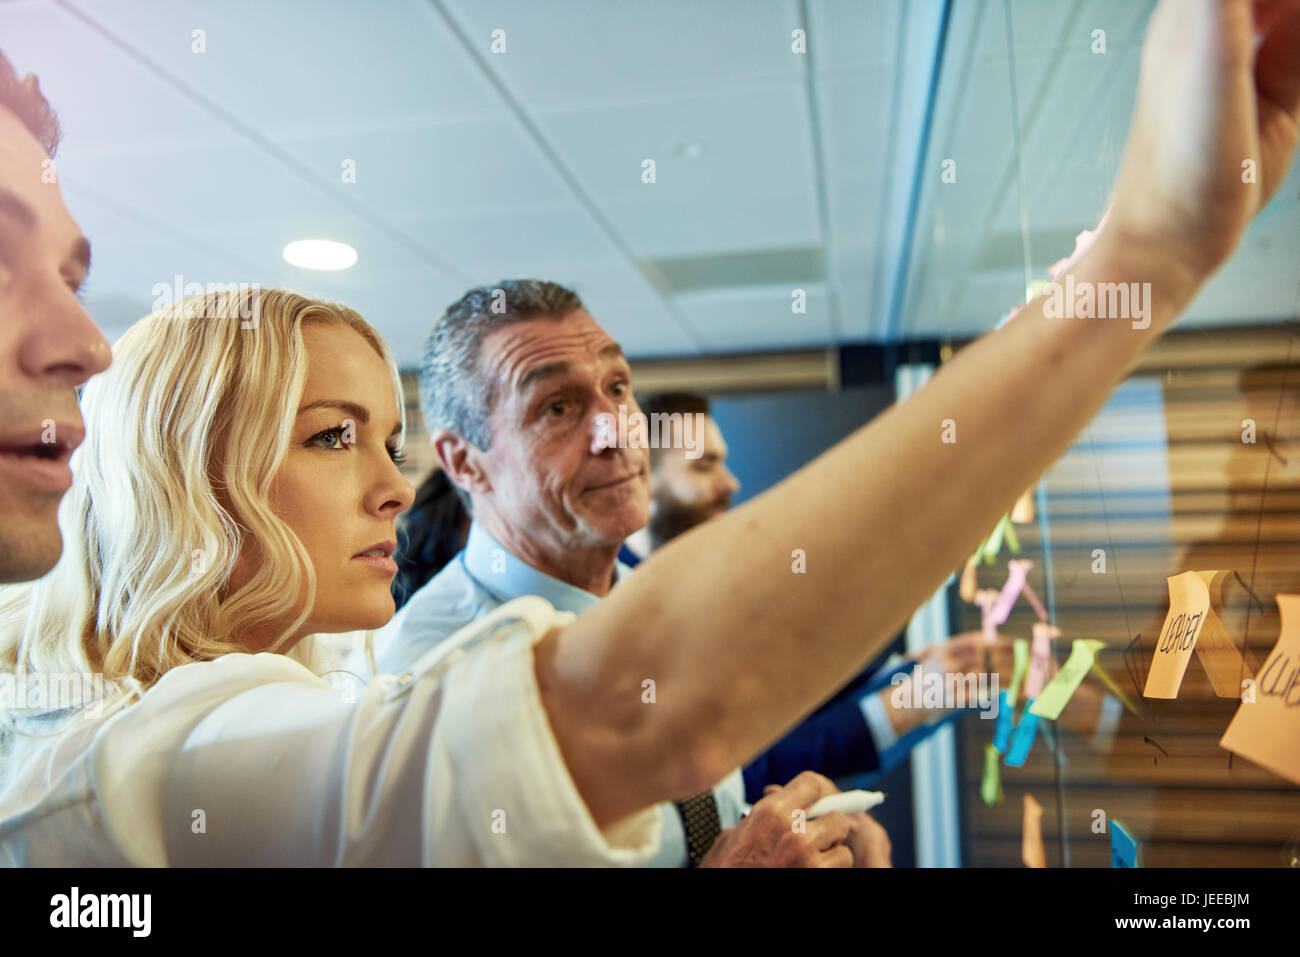 Blond young woman putting sticky note on glass partition in office, workers in background Stock Photo